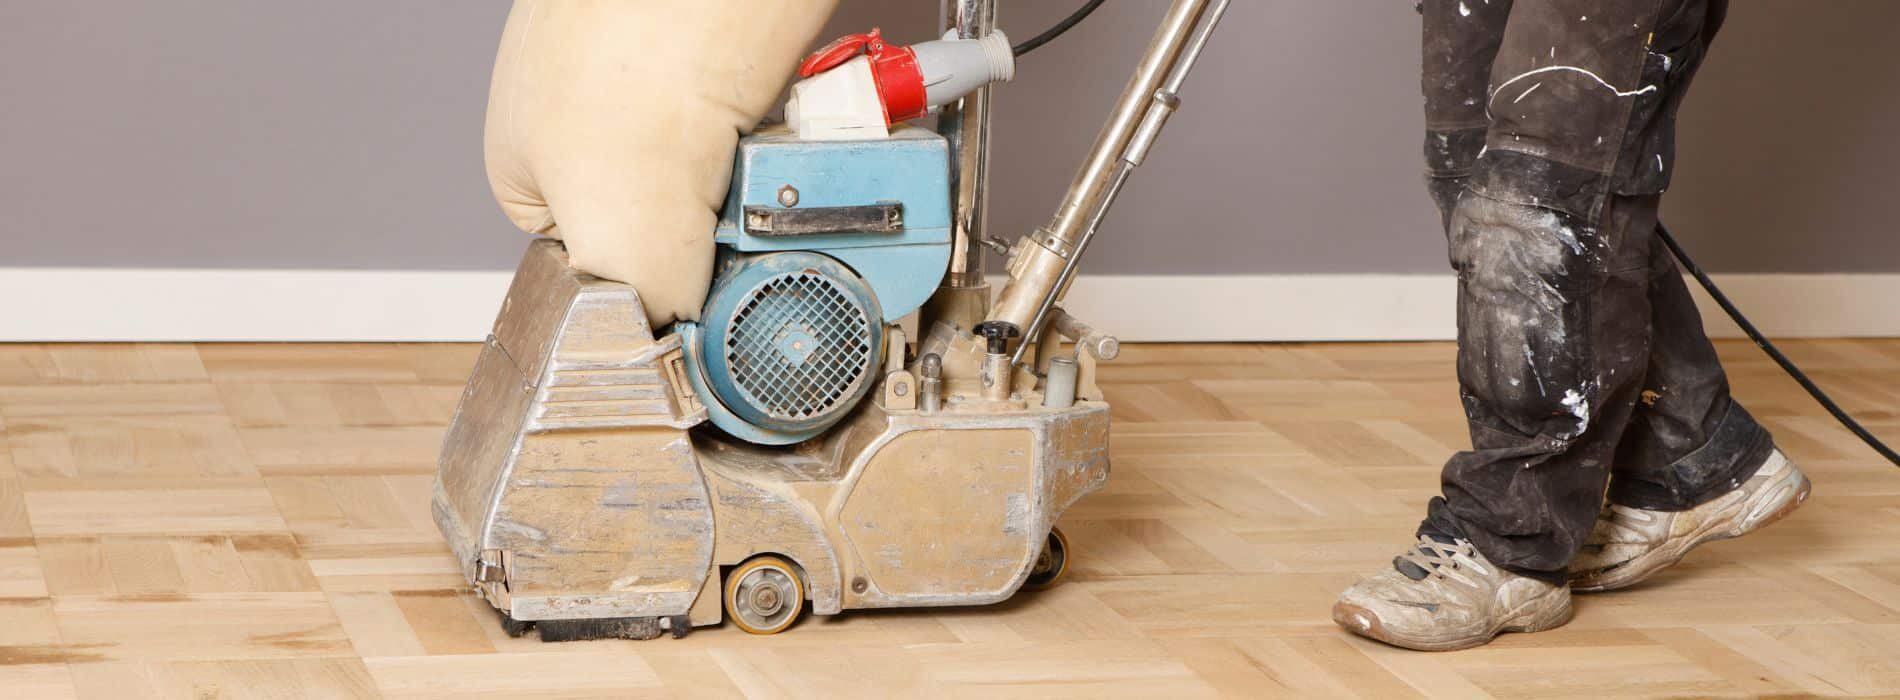 Mr Sander® in Belsize Park, NW3 uses a Bona Belt, a strong 2.2 kW belt sander connected to a dust extraction system with a HEPA filter. The sander operates at 230V at a frequency of 50/60 Hz. This configuration offers clean and efficient results when sanding a herringbone floor.